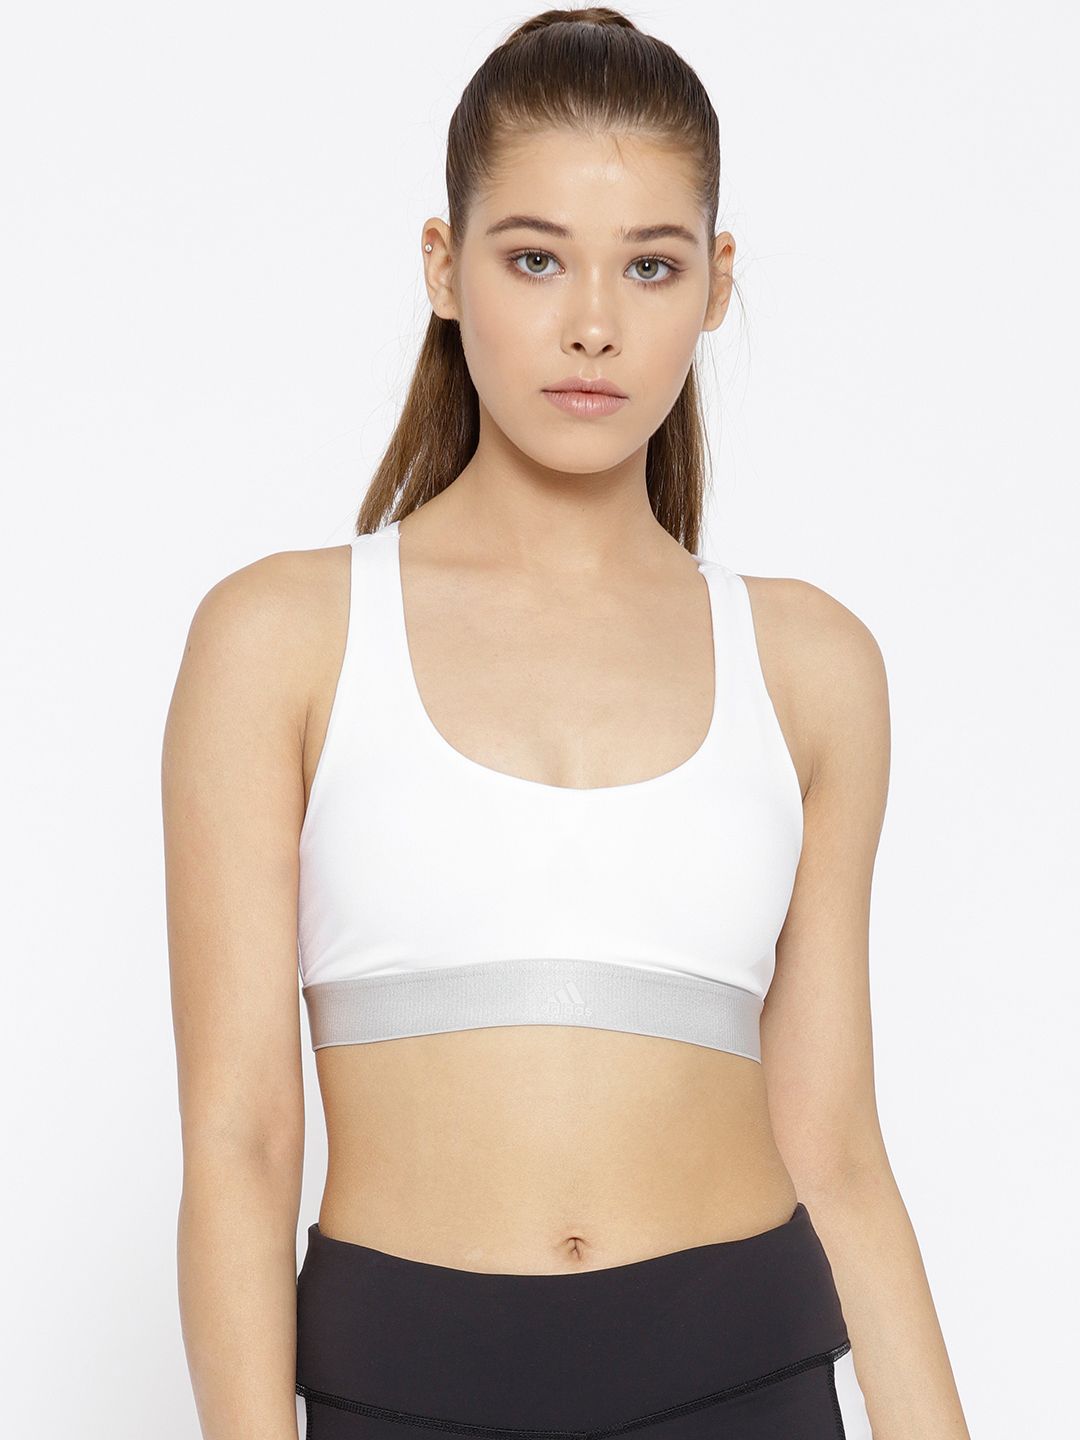 ADIDAS White Solid ALL ME VFA Training Sports Bra DM7206 Price in India